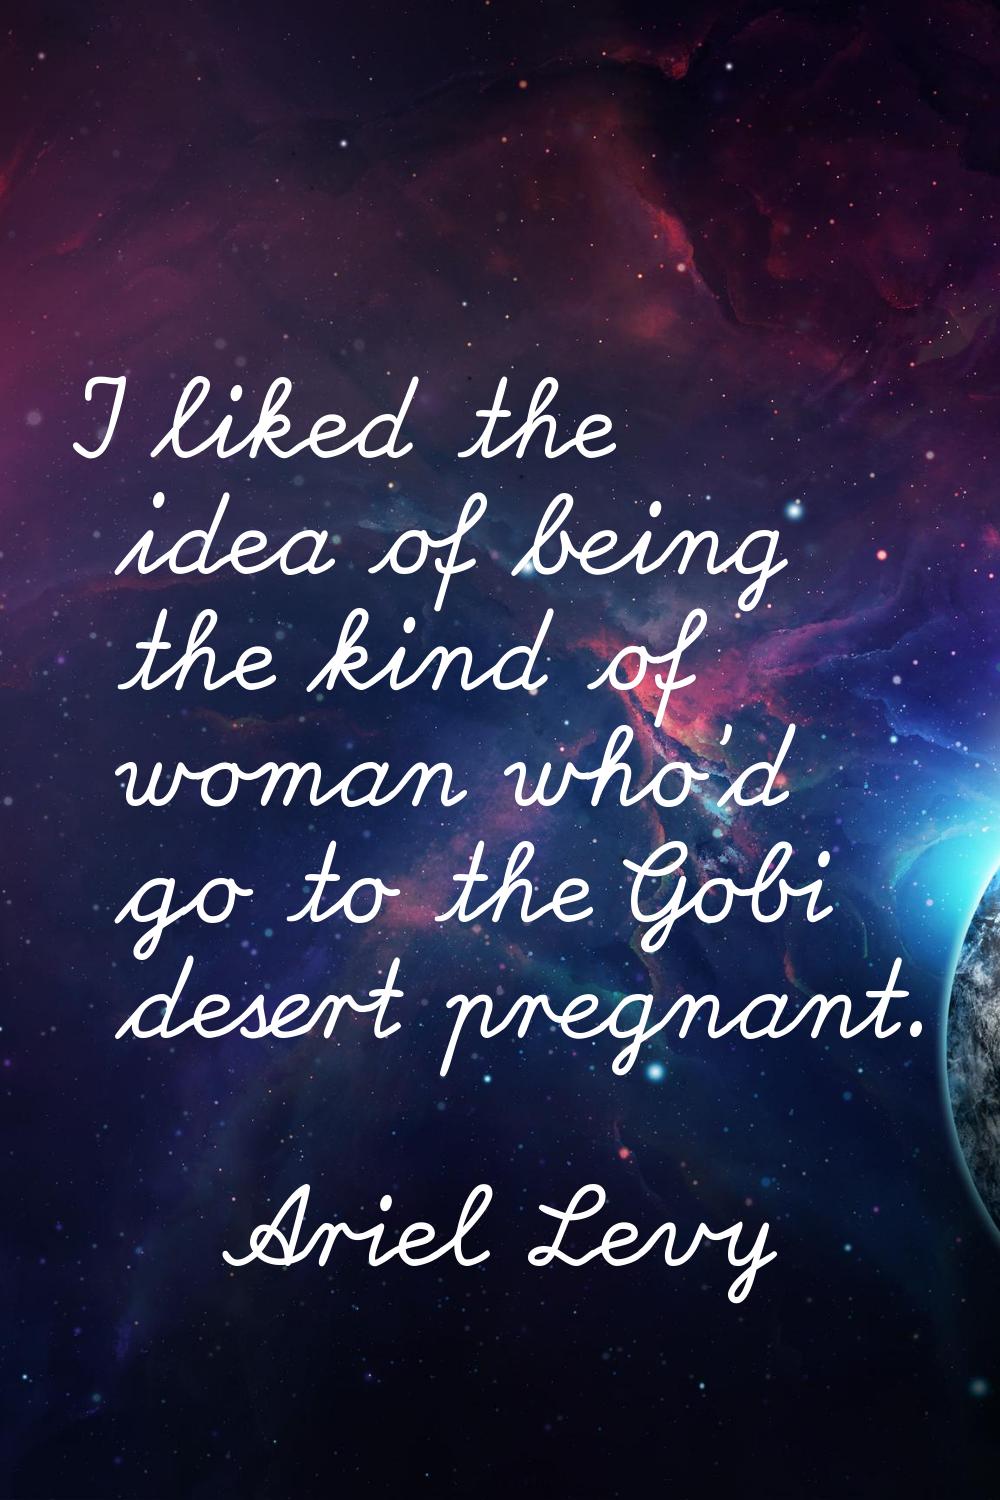 I liked the idea of being the kind of woman who'd go to the Gobi desert pregnant.